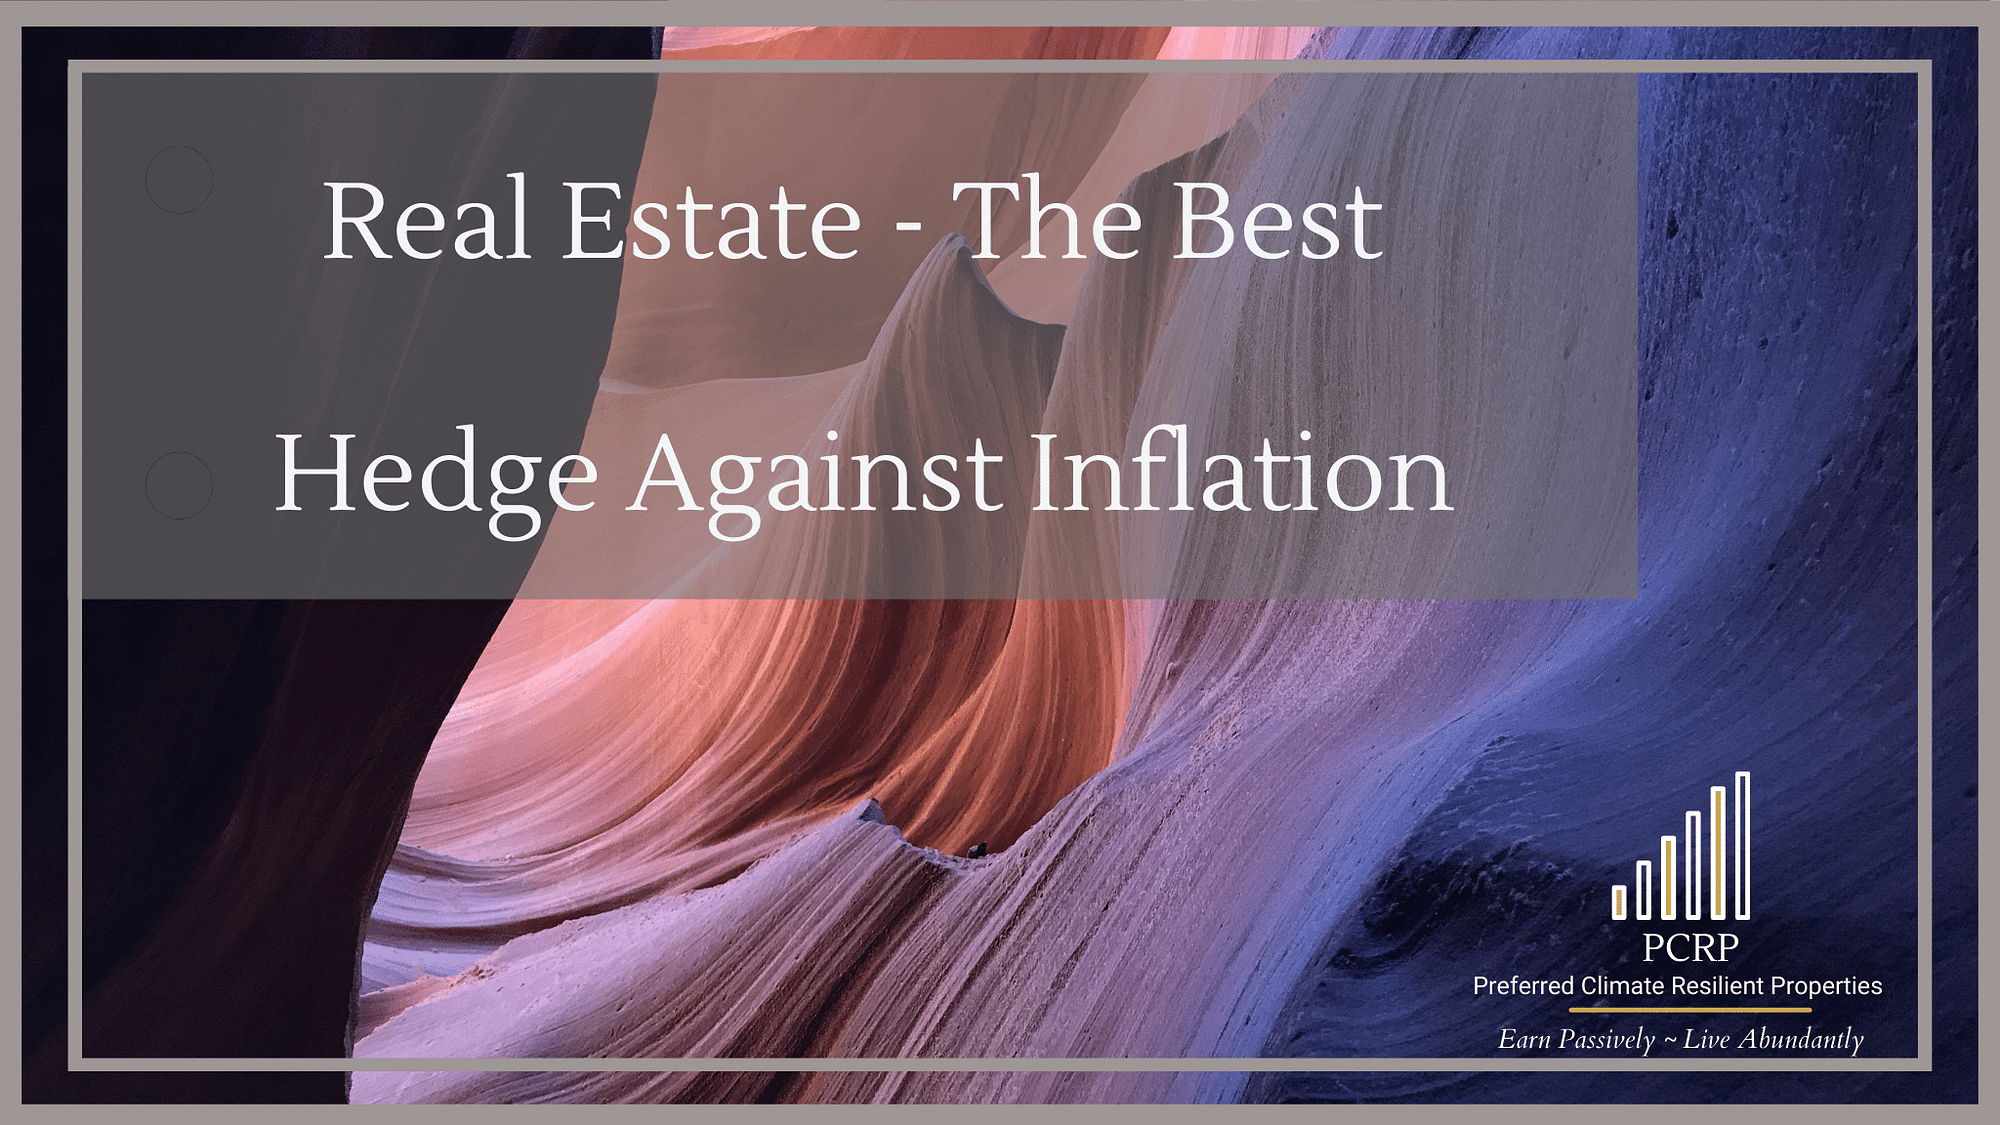 Real Estate - the best hedge against inflation